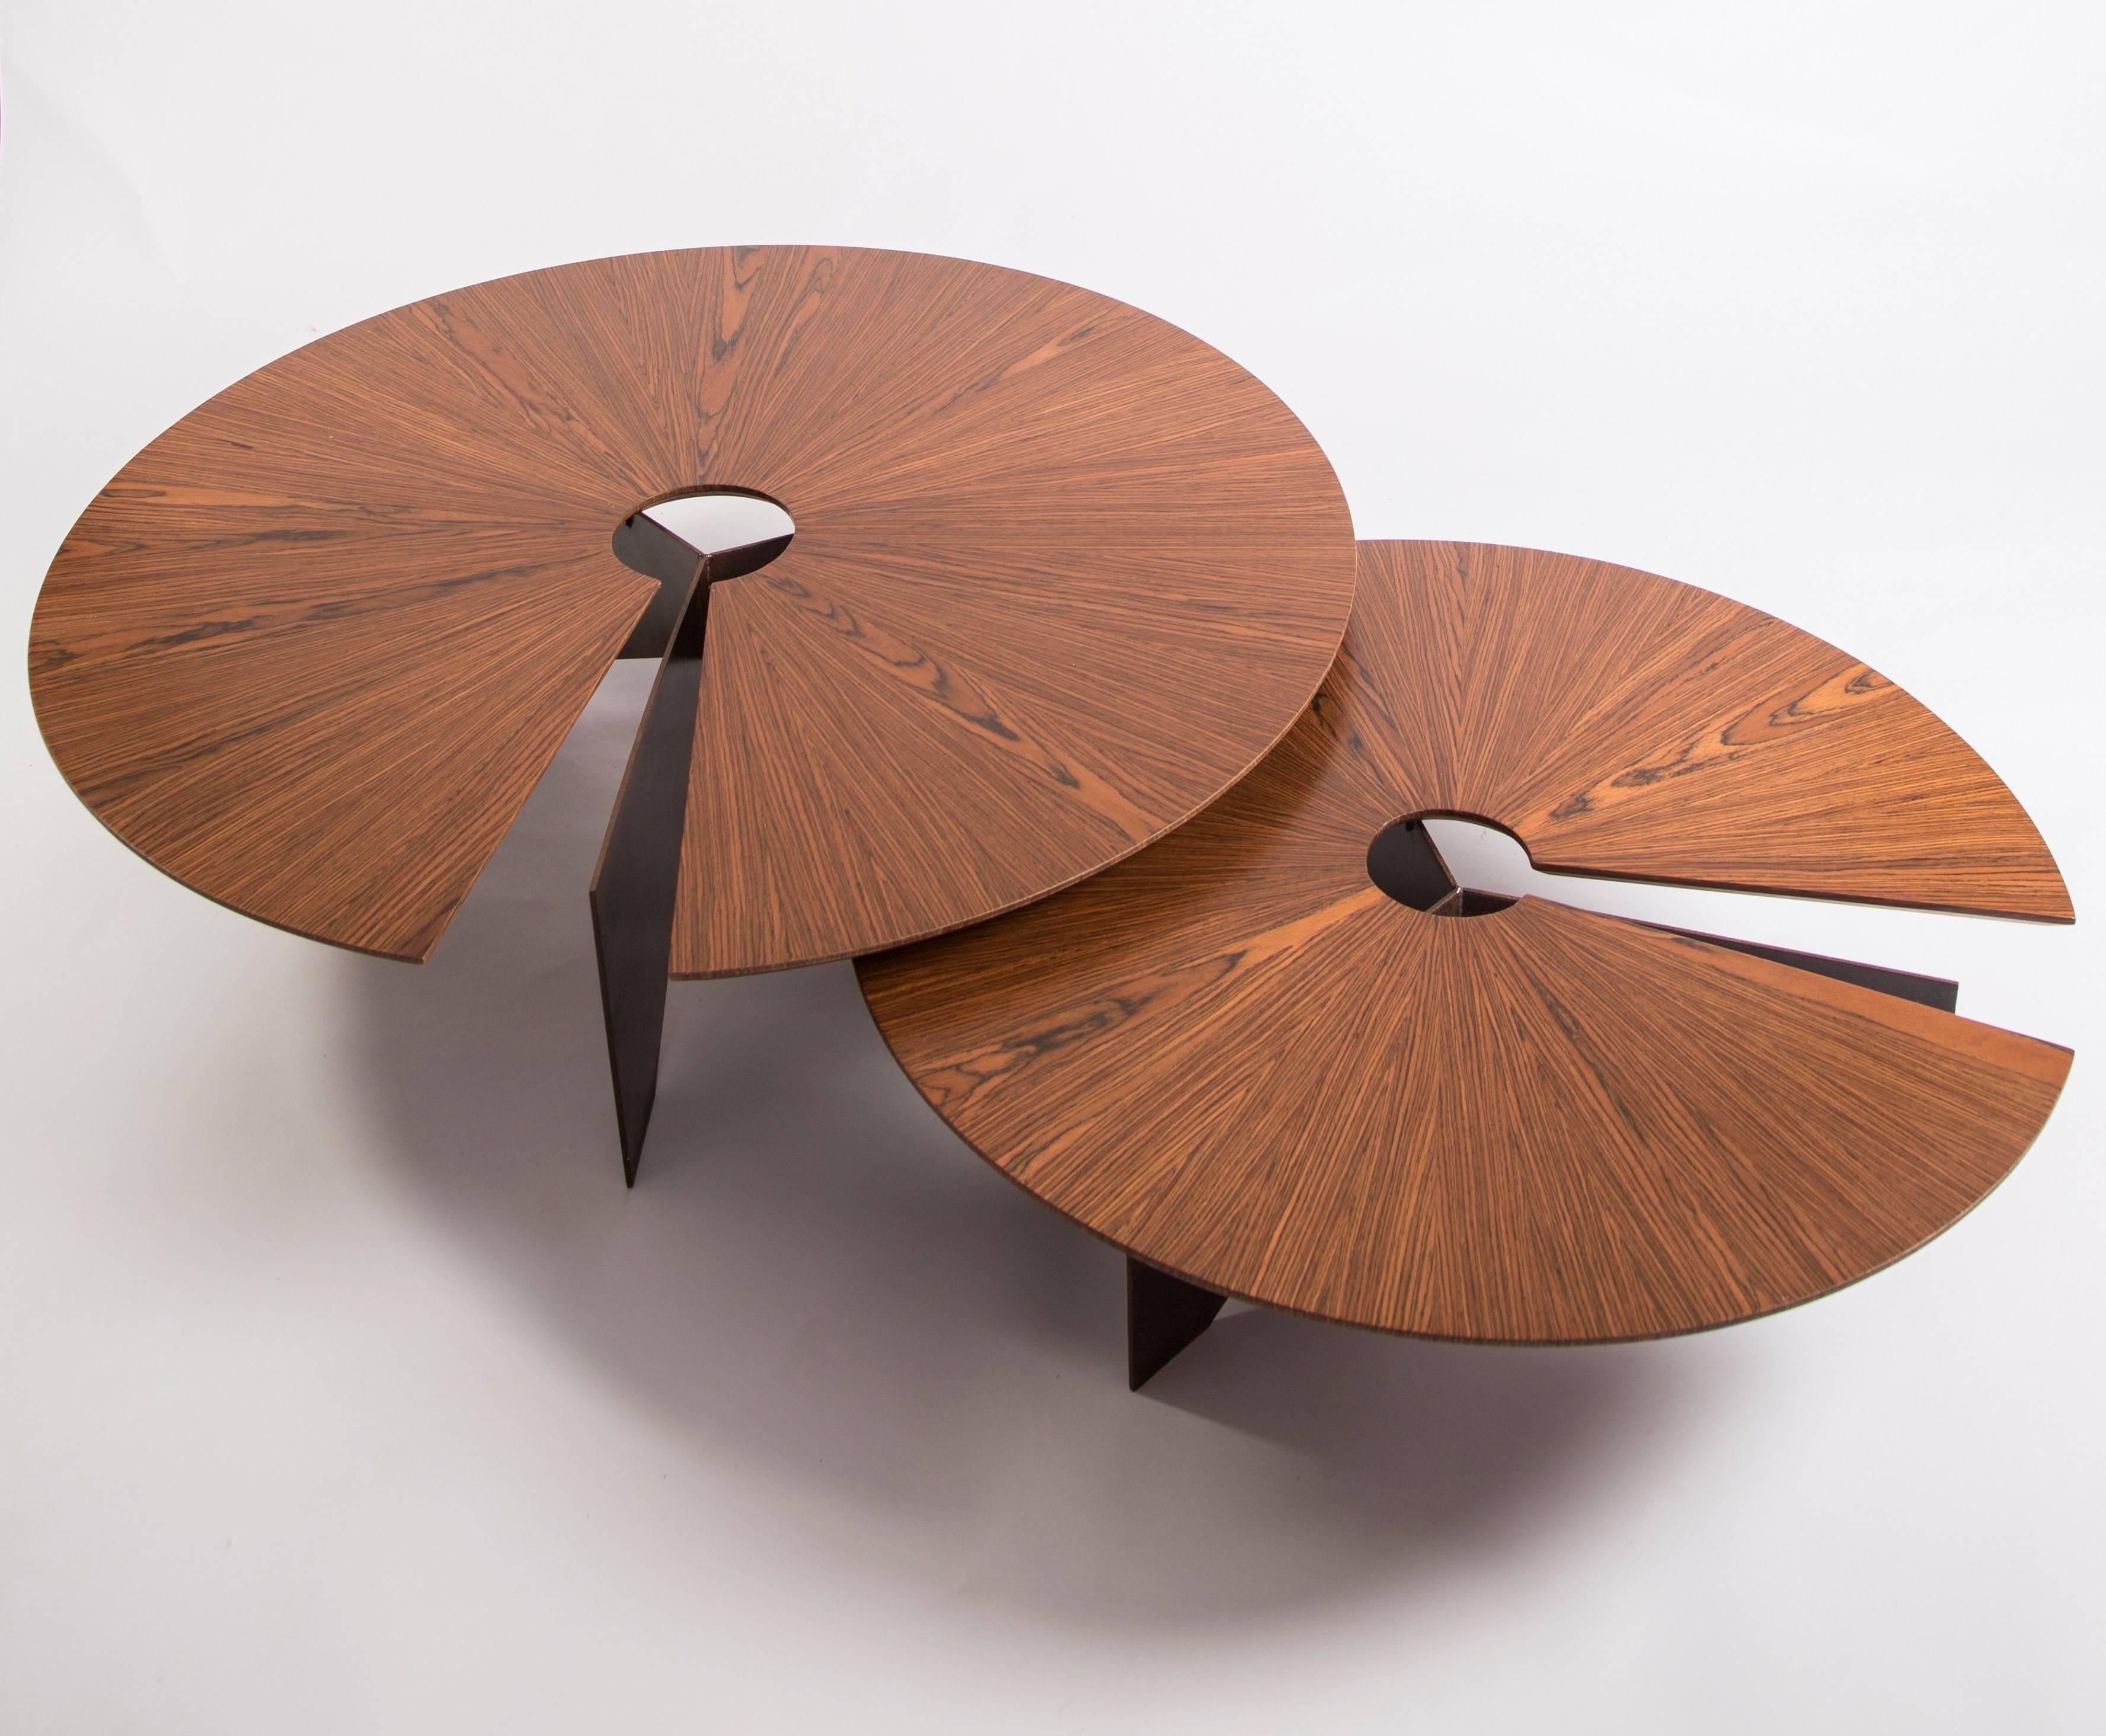 The first piece developed by the designer, this minimalist and modern coffee table receives the name Lena in honour of the nickname of his mother, Helena. It disrupts the observer, as it has its top balanced between only two of its three feet, which